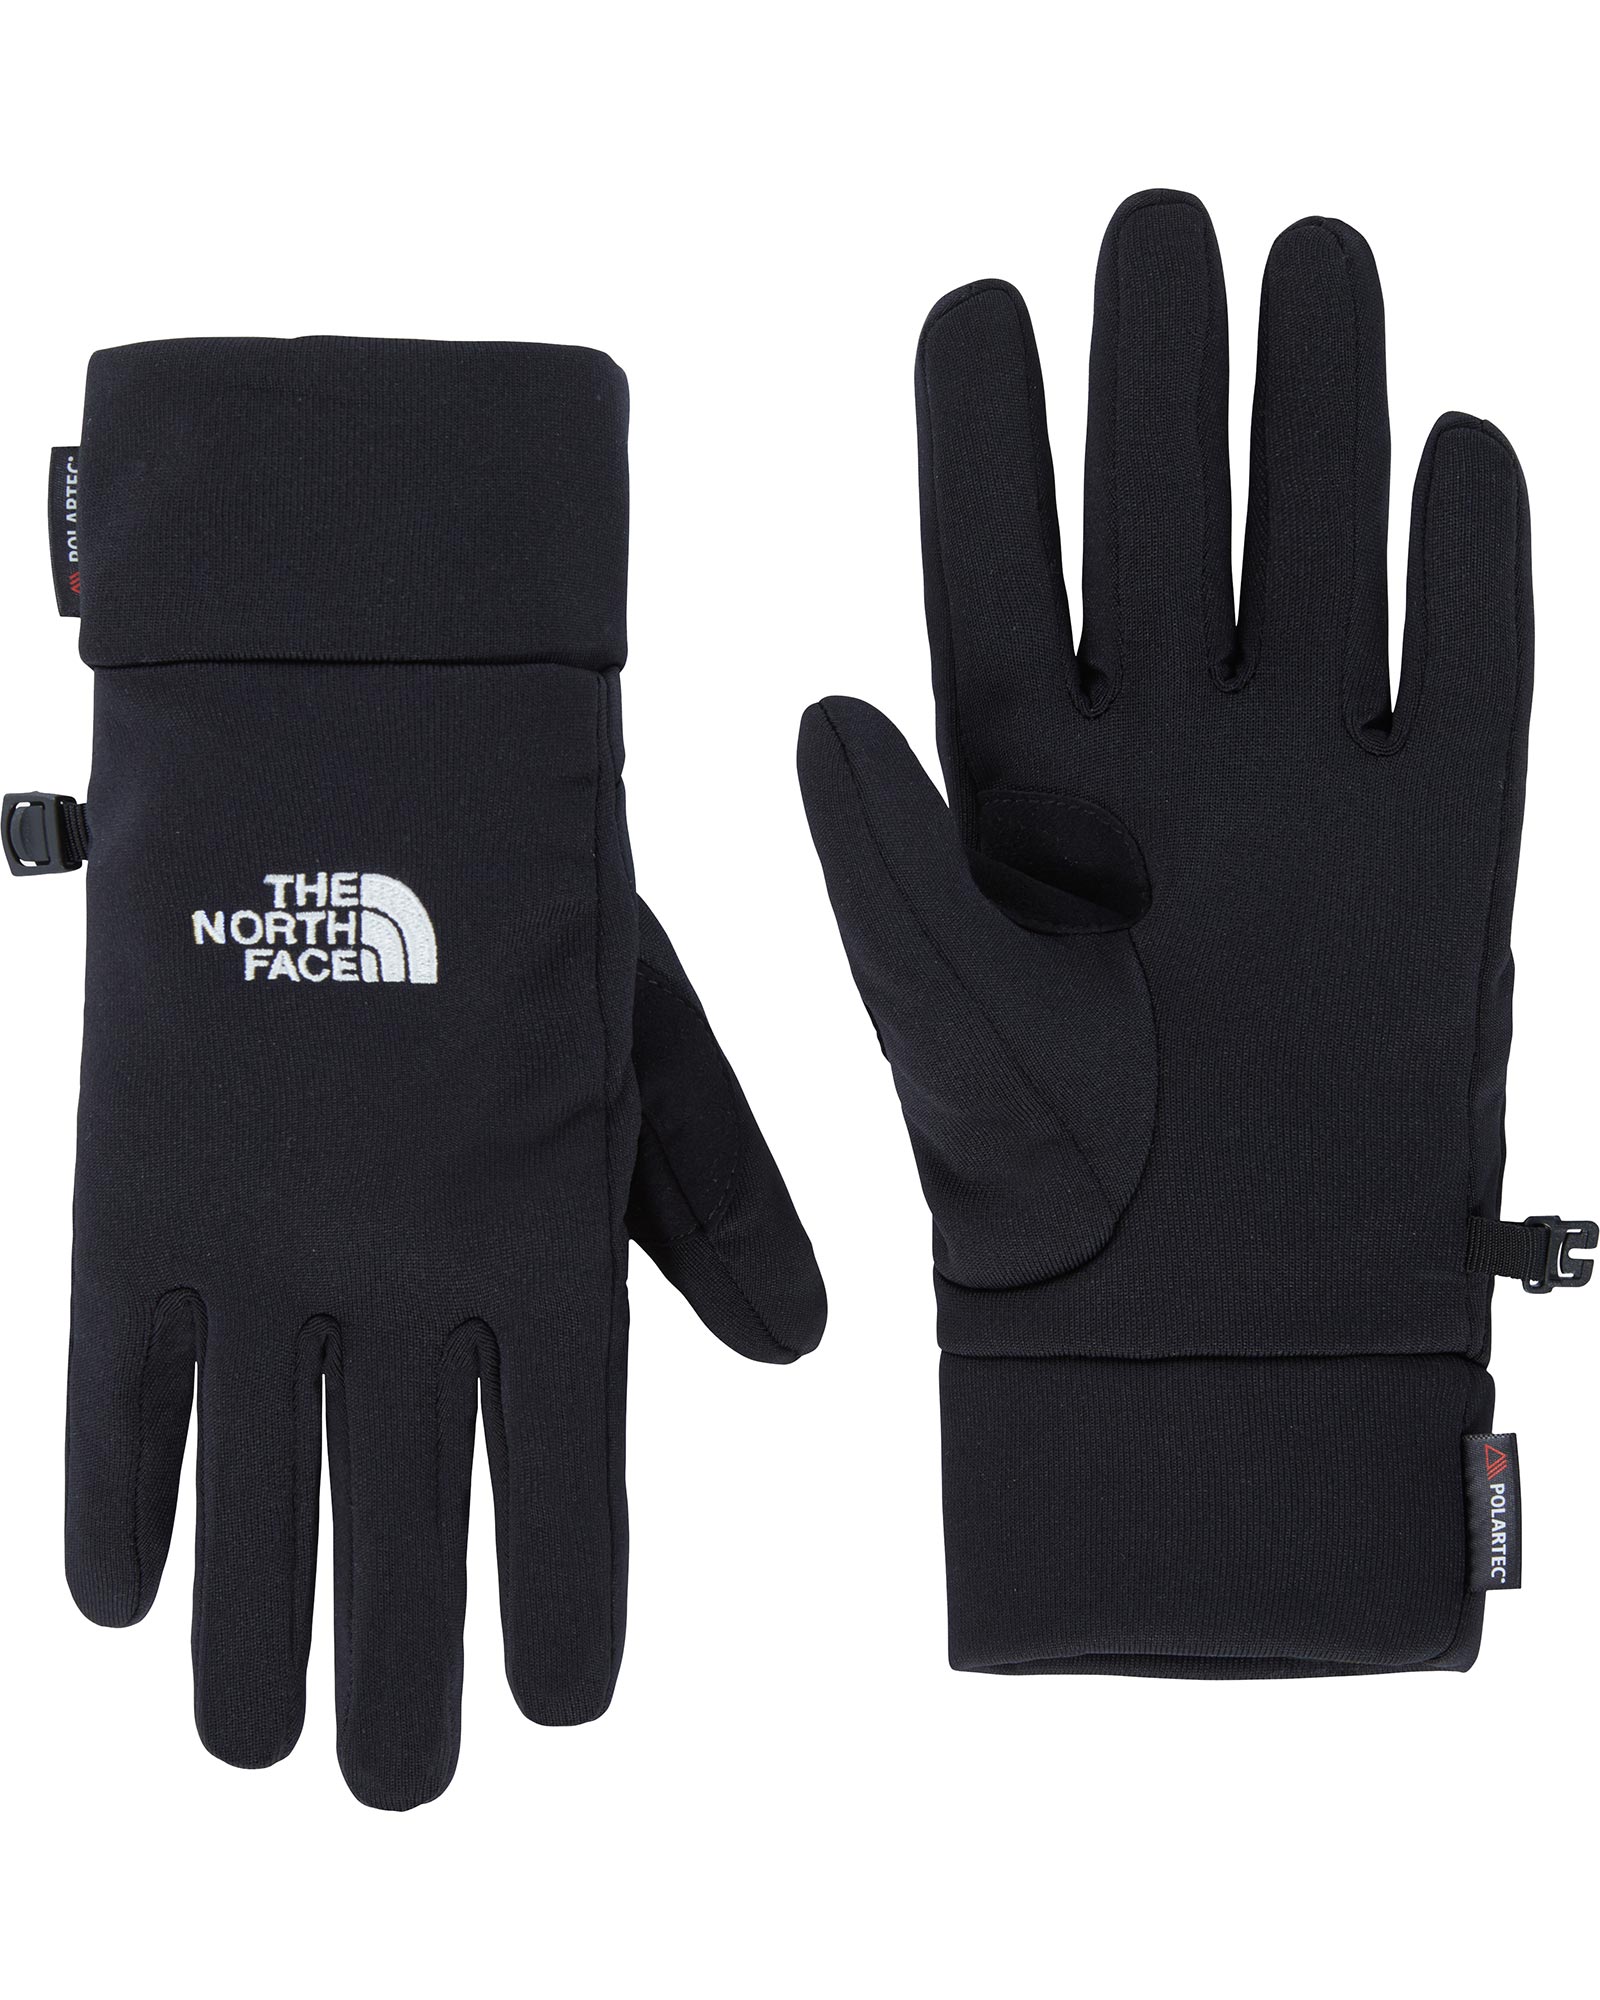 The North Face Powerstretch Mens Gloves